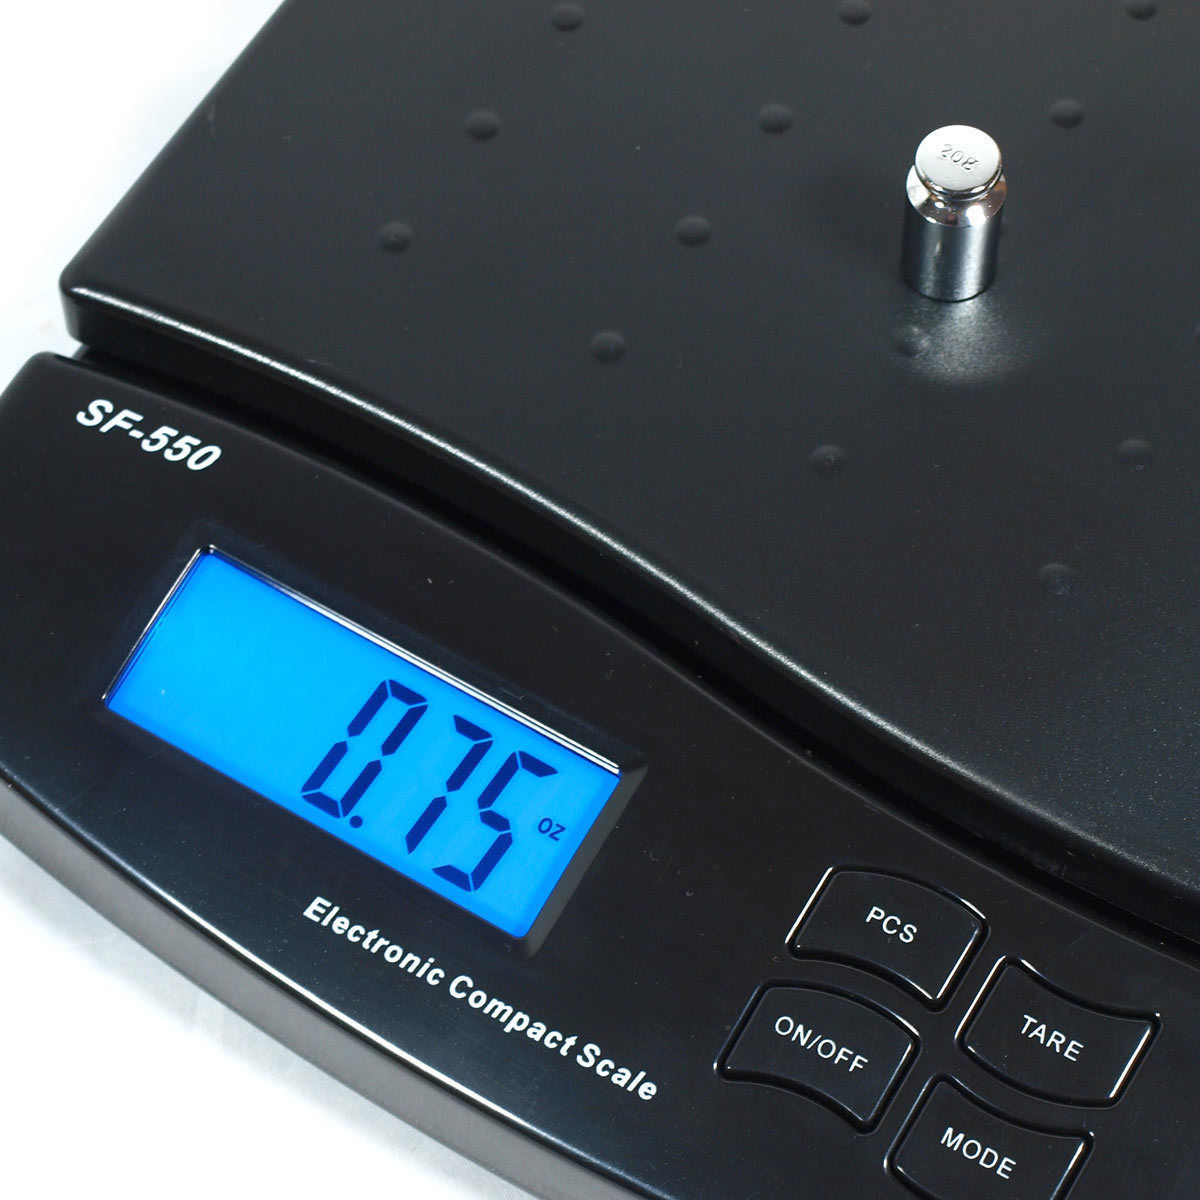 Buy SALTER No. 155 POSTAL SCALE Showing Pounds & Ounces and